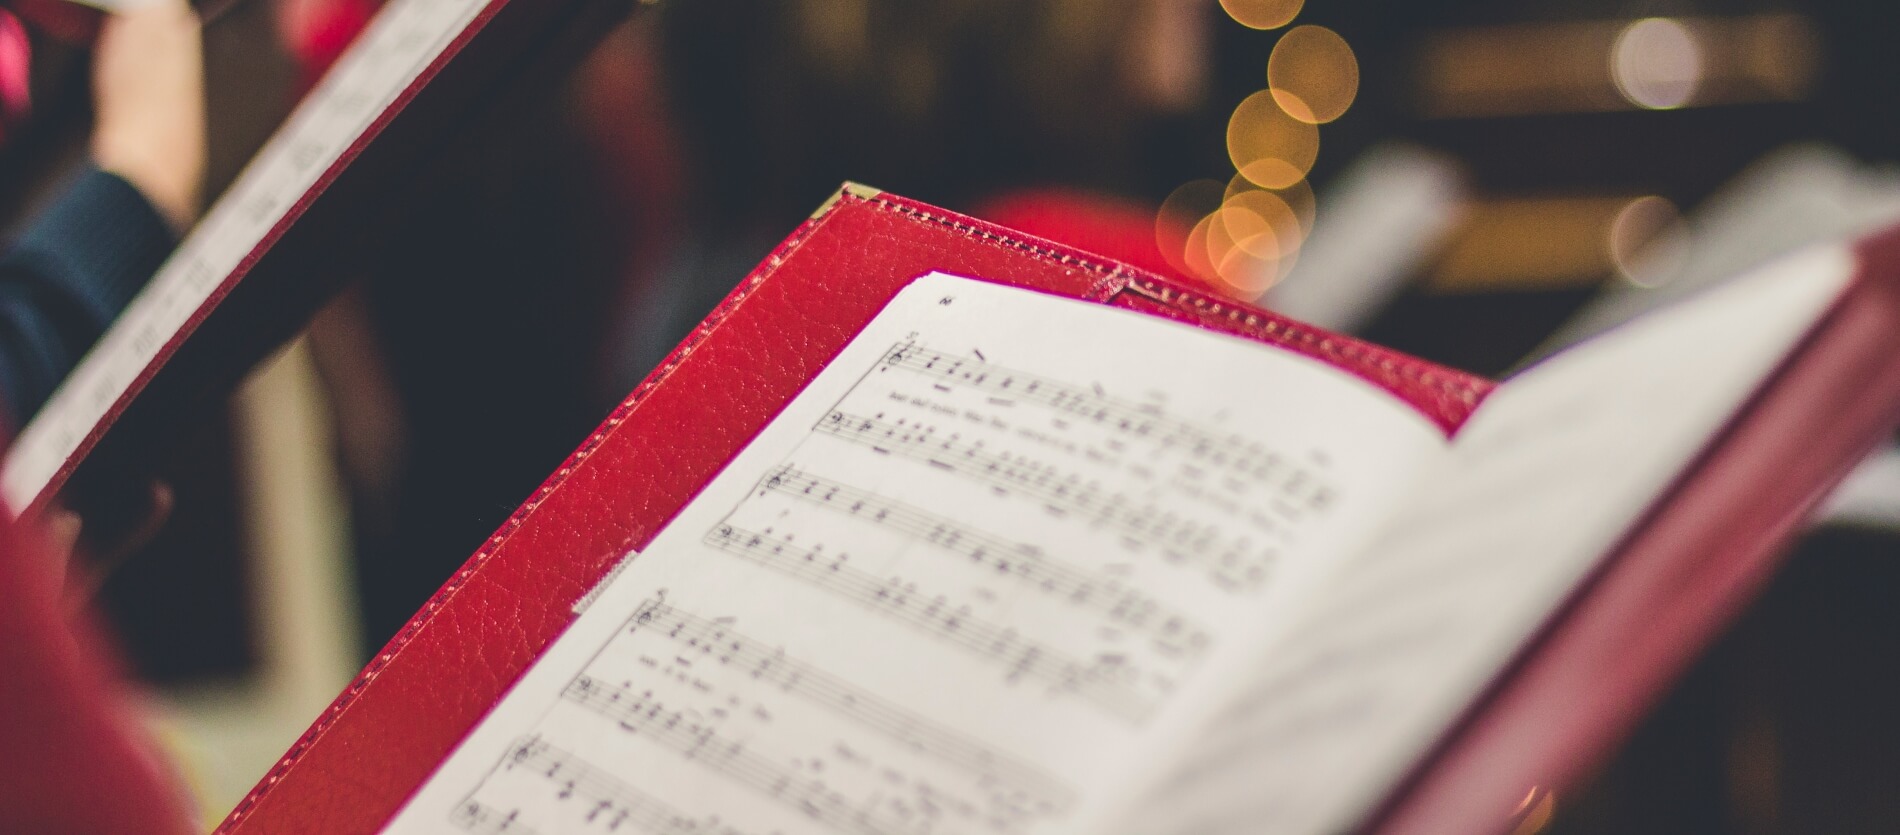 Focused shot of a red song book showing music song sheet. Fairy fairy lights are visible in the background